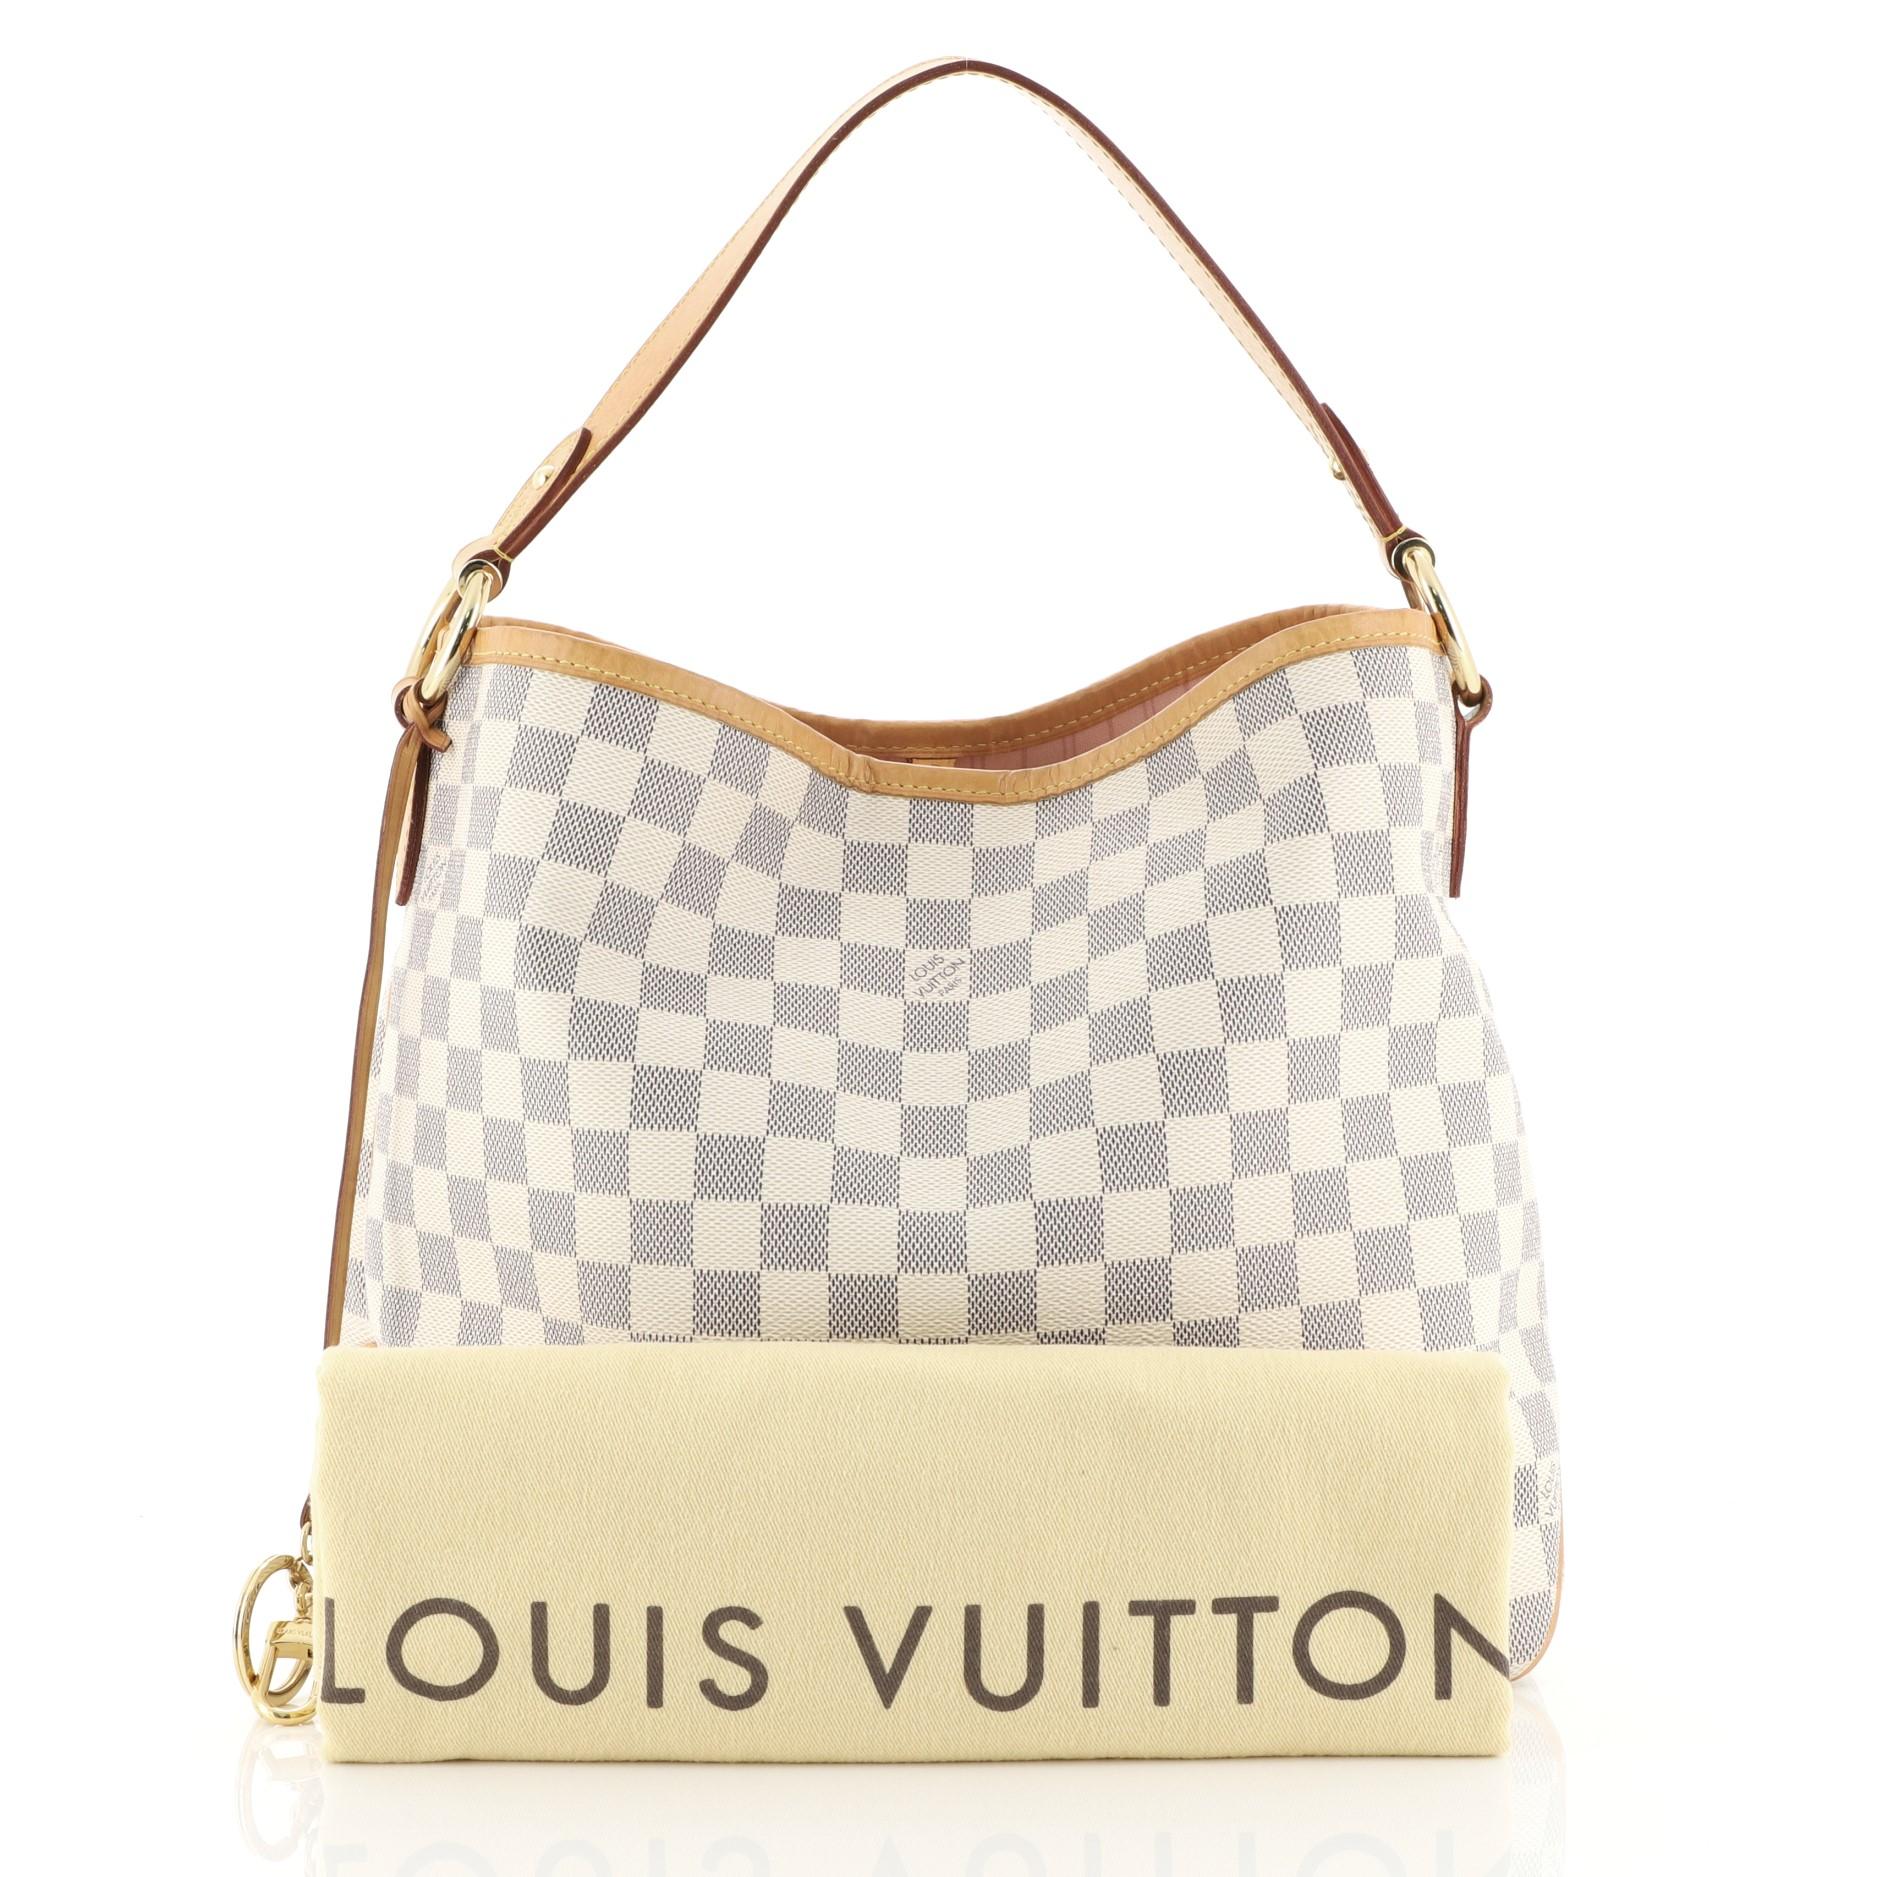 This Louis Vuitton Delightful NM Handbag Damier PM, crafted in damier azur coated canvas, features a flat leather handle and gold-tone hardware. Its hook closure opens to a pink fabric interior with side zip pocket. Authenticity code reads: SD4166.